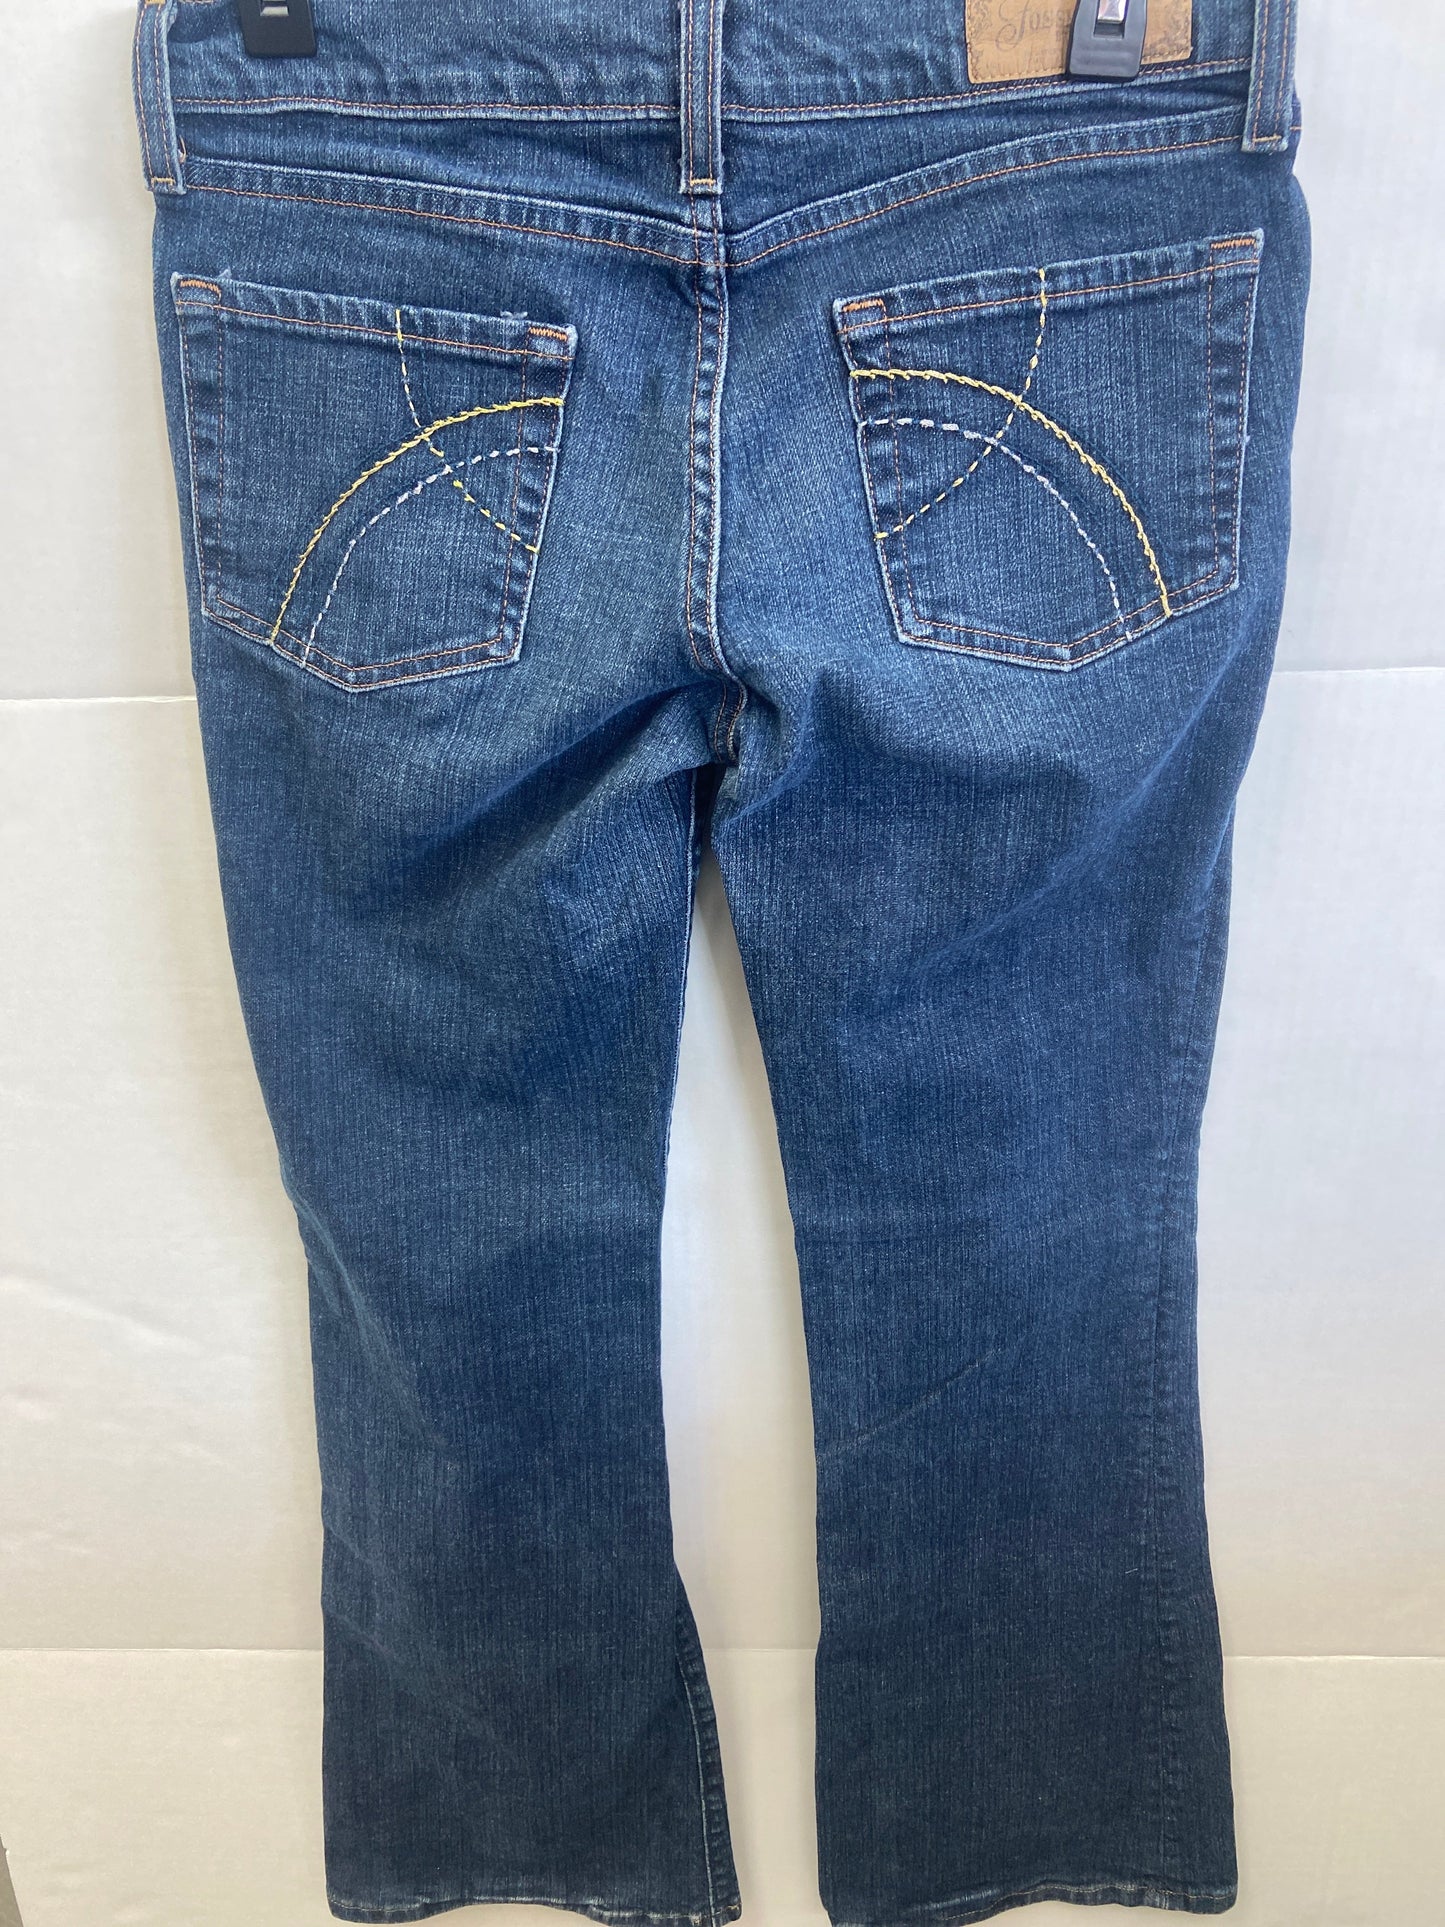 Jeans Straight By Fossil  Size: 8